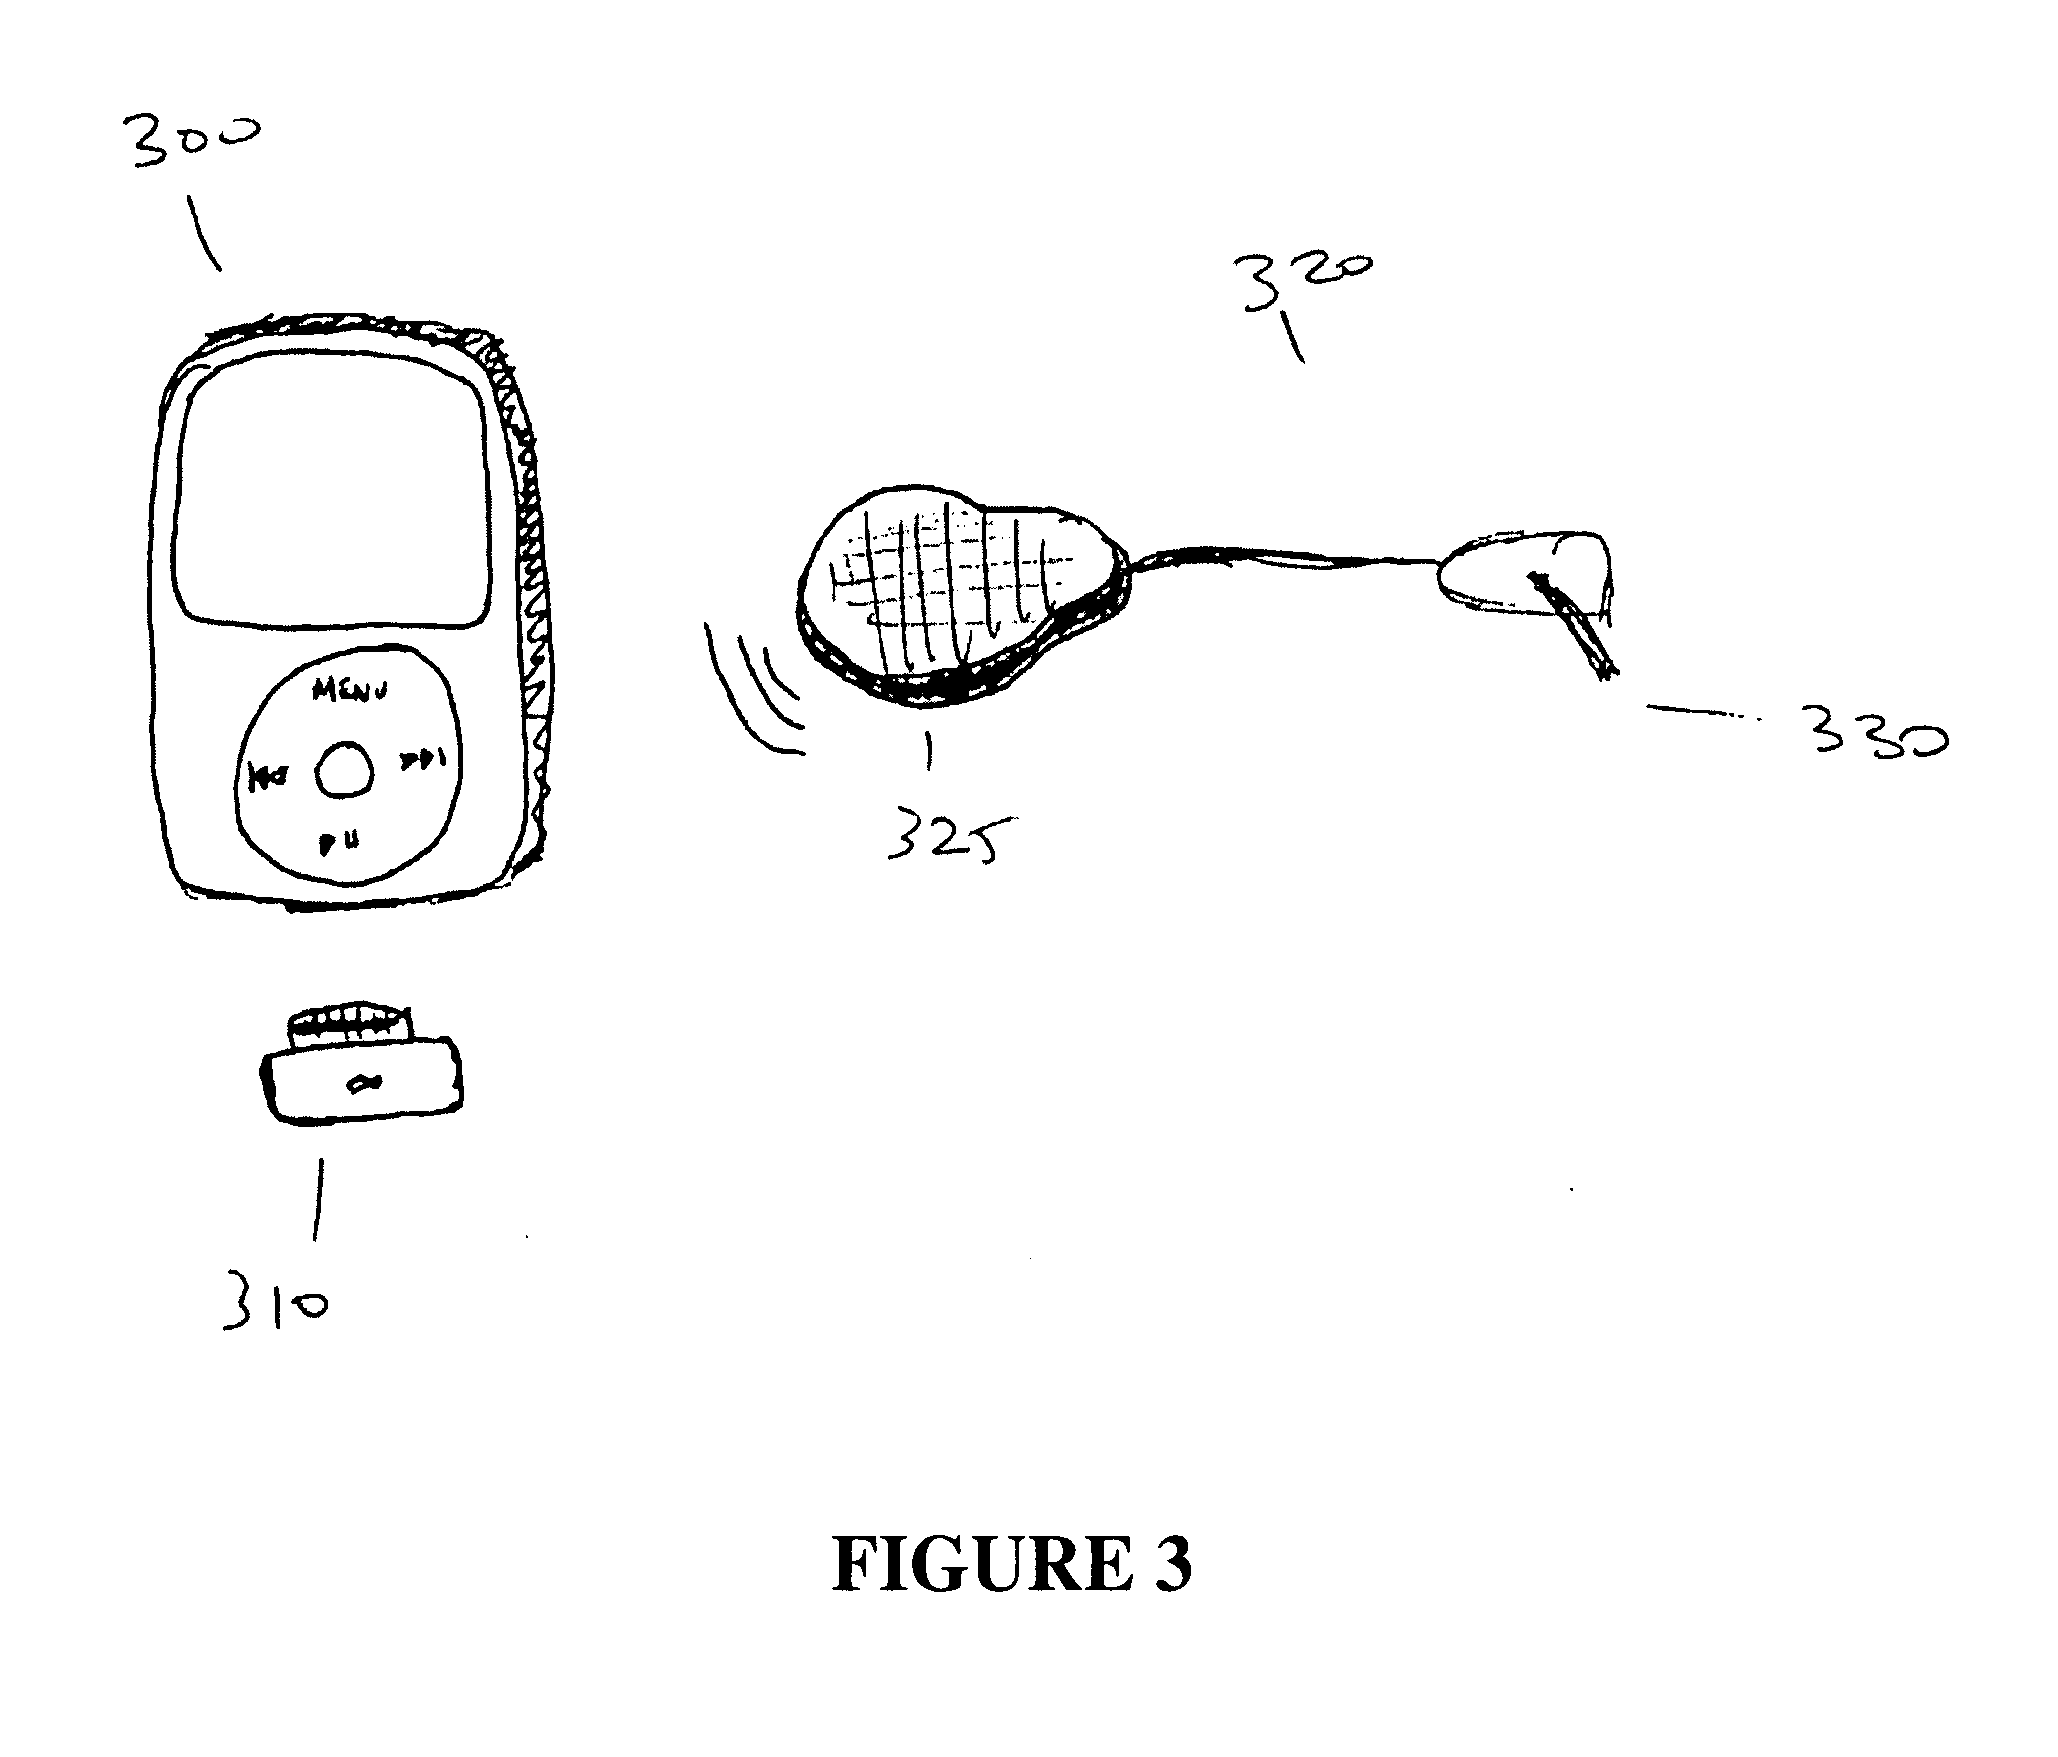 Systems and Methods for Diabetes Management Using Consumer Electronic Devices